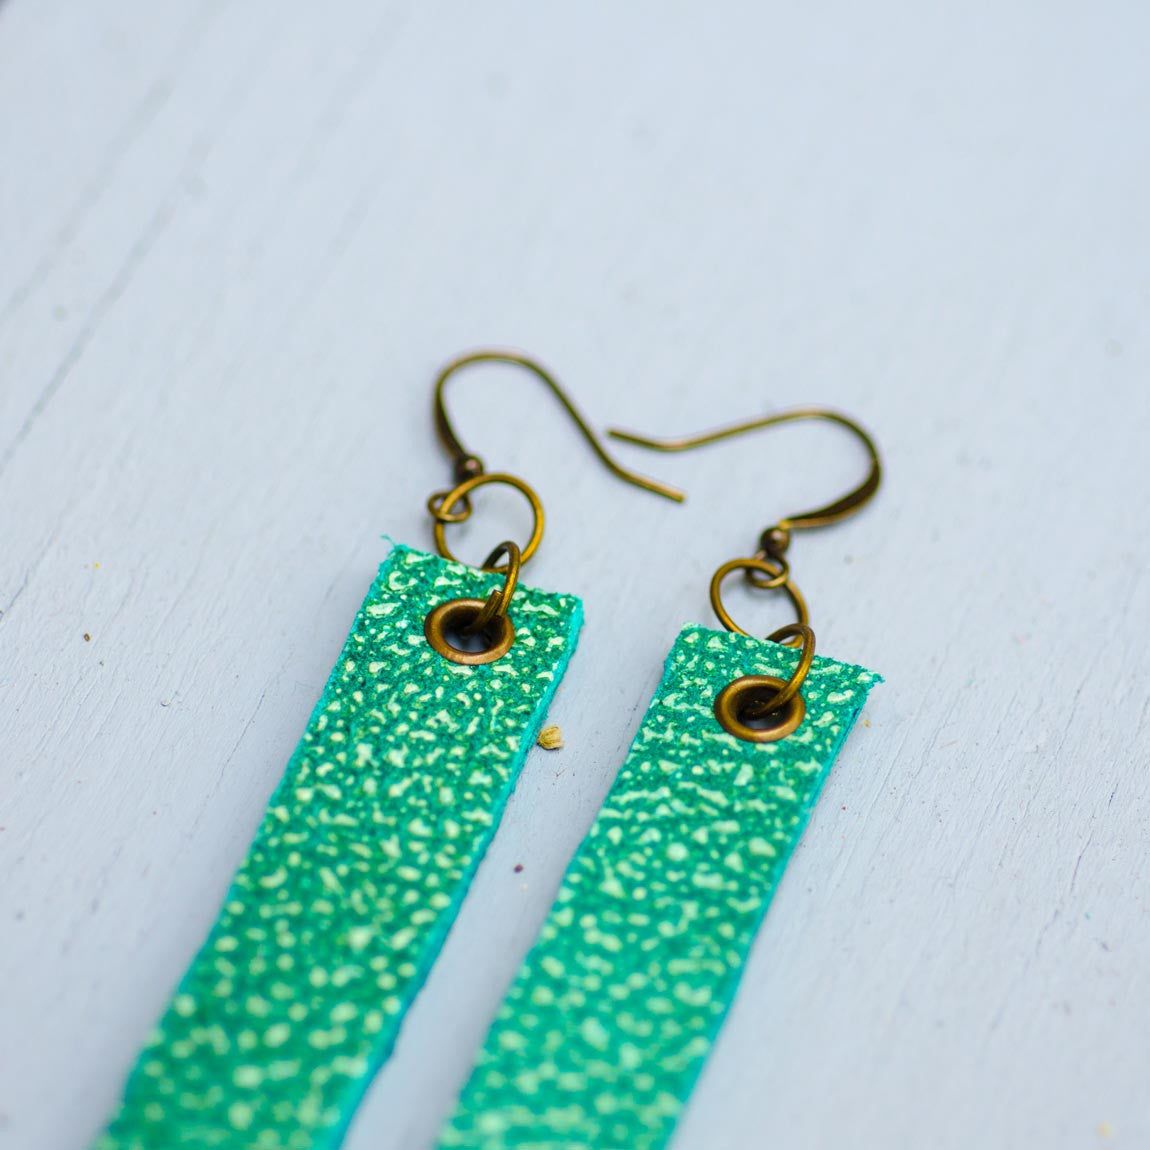 sea green minimalist rectangular textured leather earrings with antique details